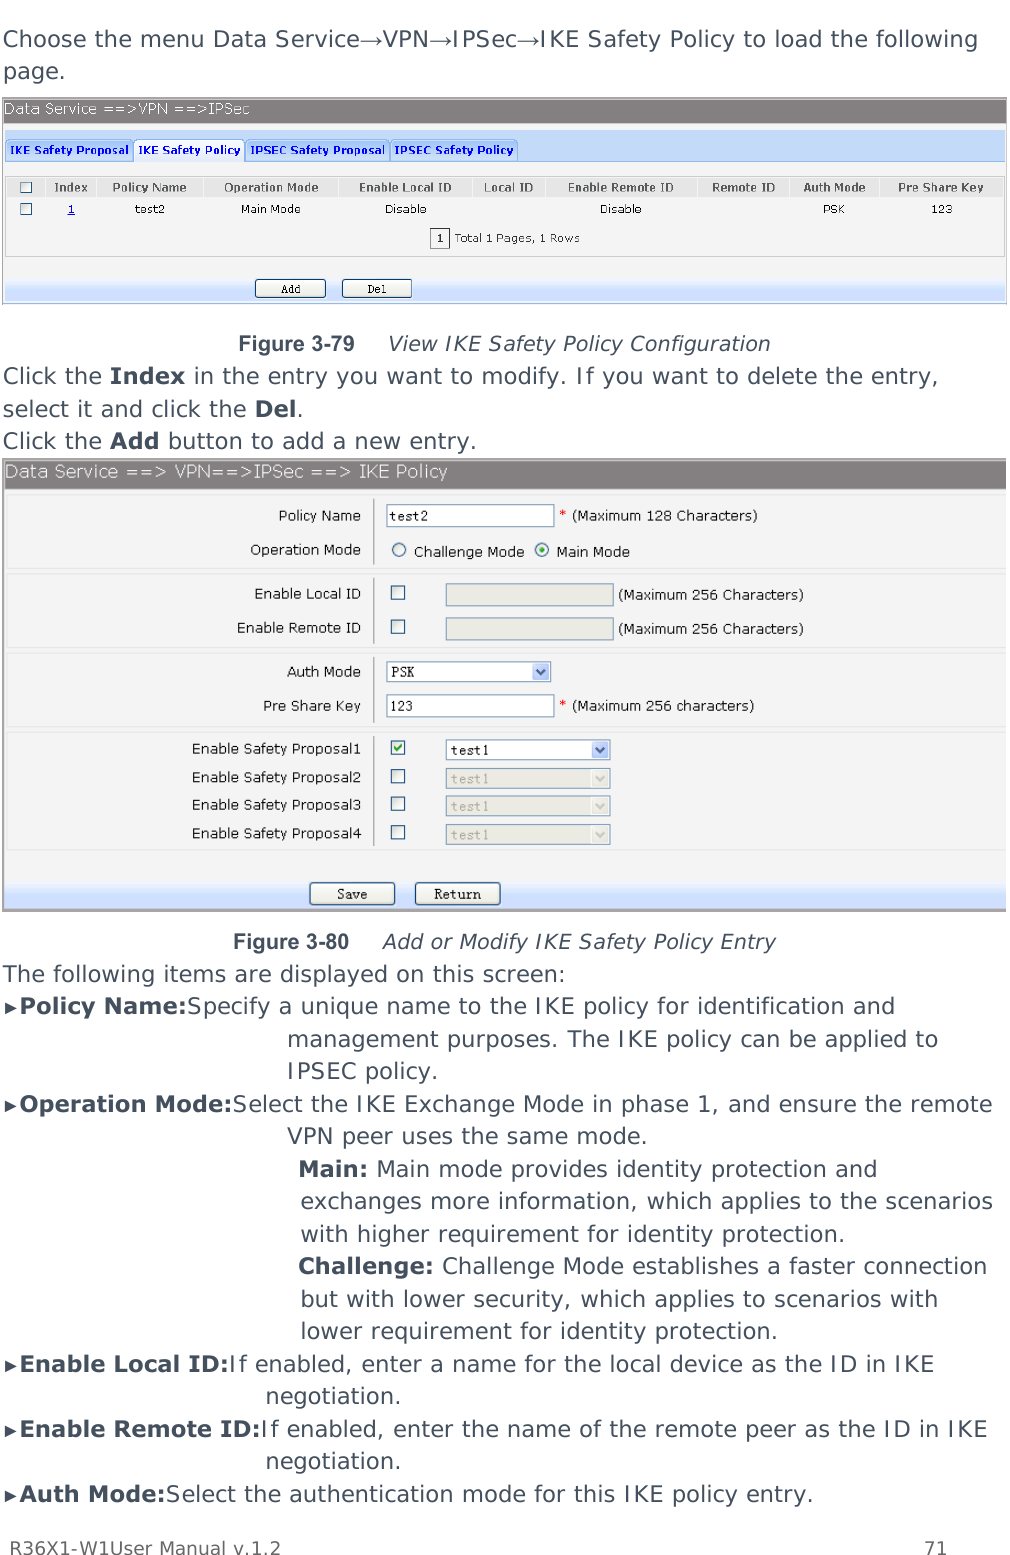           R36X1-W1User Manual v.1.2    71  Choose the menu Data Service→VPN→IPSec→IKE Safety Policy to load the following page.  Figure 3-79  View IKE Safety Policy Configuration Click the Index in the entry you want to modify. If you want to delete the entry, select it and click the Del. Click the Add button to add a new entry.  Figure 3-80  Add or Modify IKE Safety Policy Entry The following items are displayed on this screen: ►Policy Name:Specify a unique name to the IKE policy for identification and management purposes. The IKE policy can be applied to IPSEC policy. ►Operation Mode:Select the IKE Exchange Mode in phase 1, and ensure the remote VPN peer uses the same mode. Main: Main mode provides identity protection and exchanges more information, which applies to the scenarios with higher requirement for identity protection. Challenge: Challenge Mode establishes a faster connection but with lower security, which applies to scenarios with lower requirement for identity protection. ►Enable Local ID:If enabled, enter a name for the local device as the ID in IKE negotiation. ►Enable Remote ID:If enabled, enter the name of the remote peer as the ID in IKE negotiation. ►Auth Mode:Select the authentication mode for this IKE policy entry. 